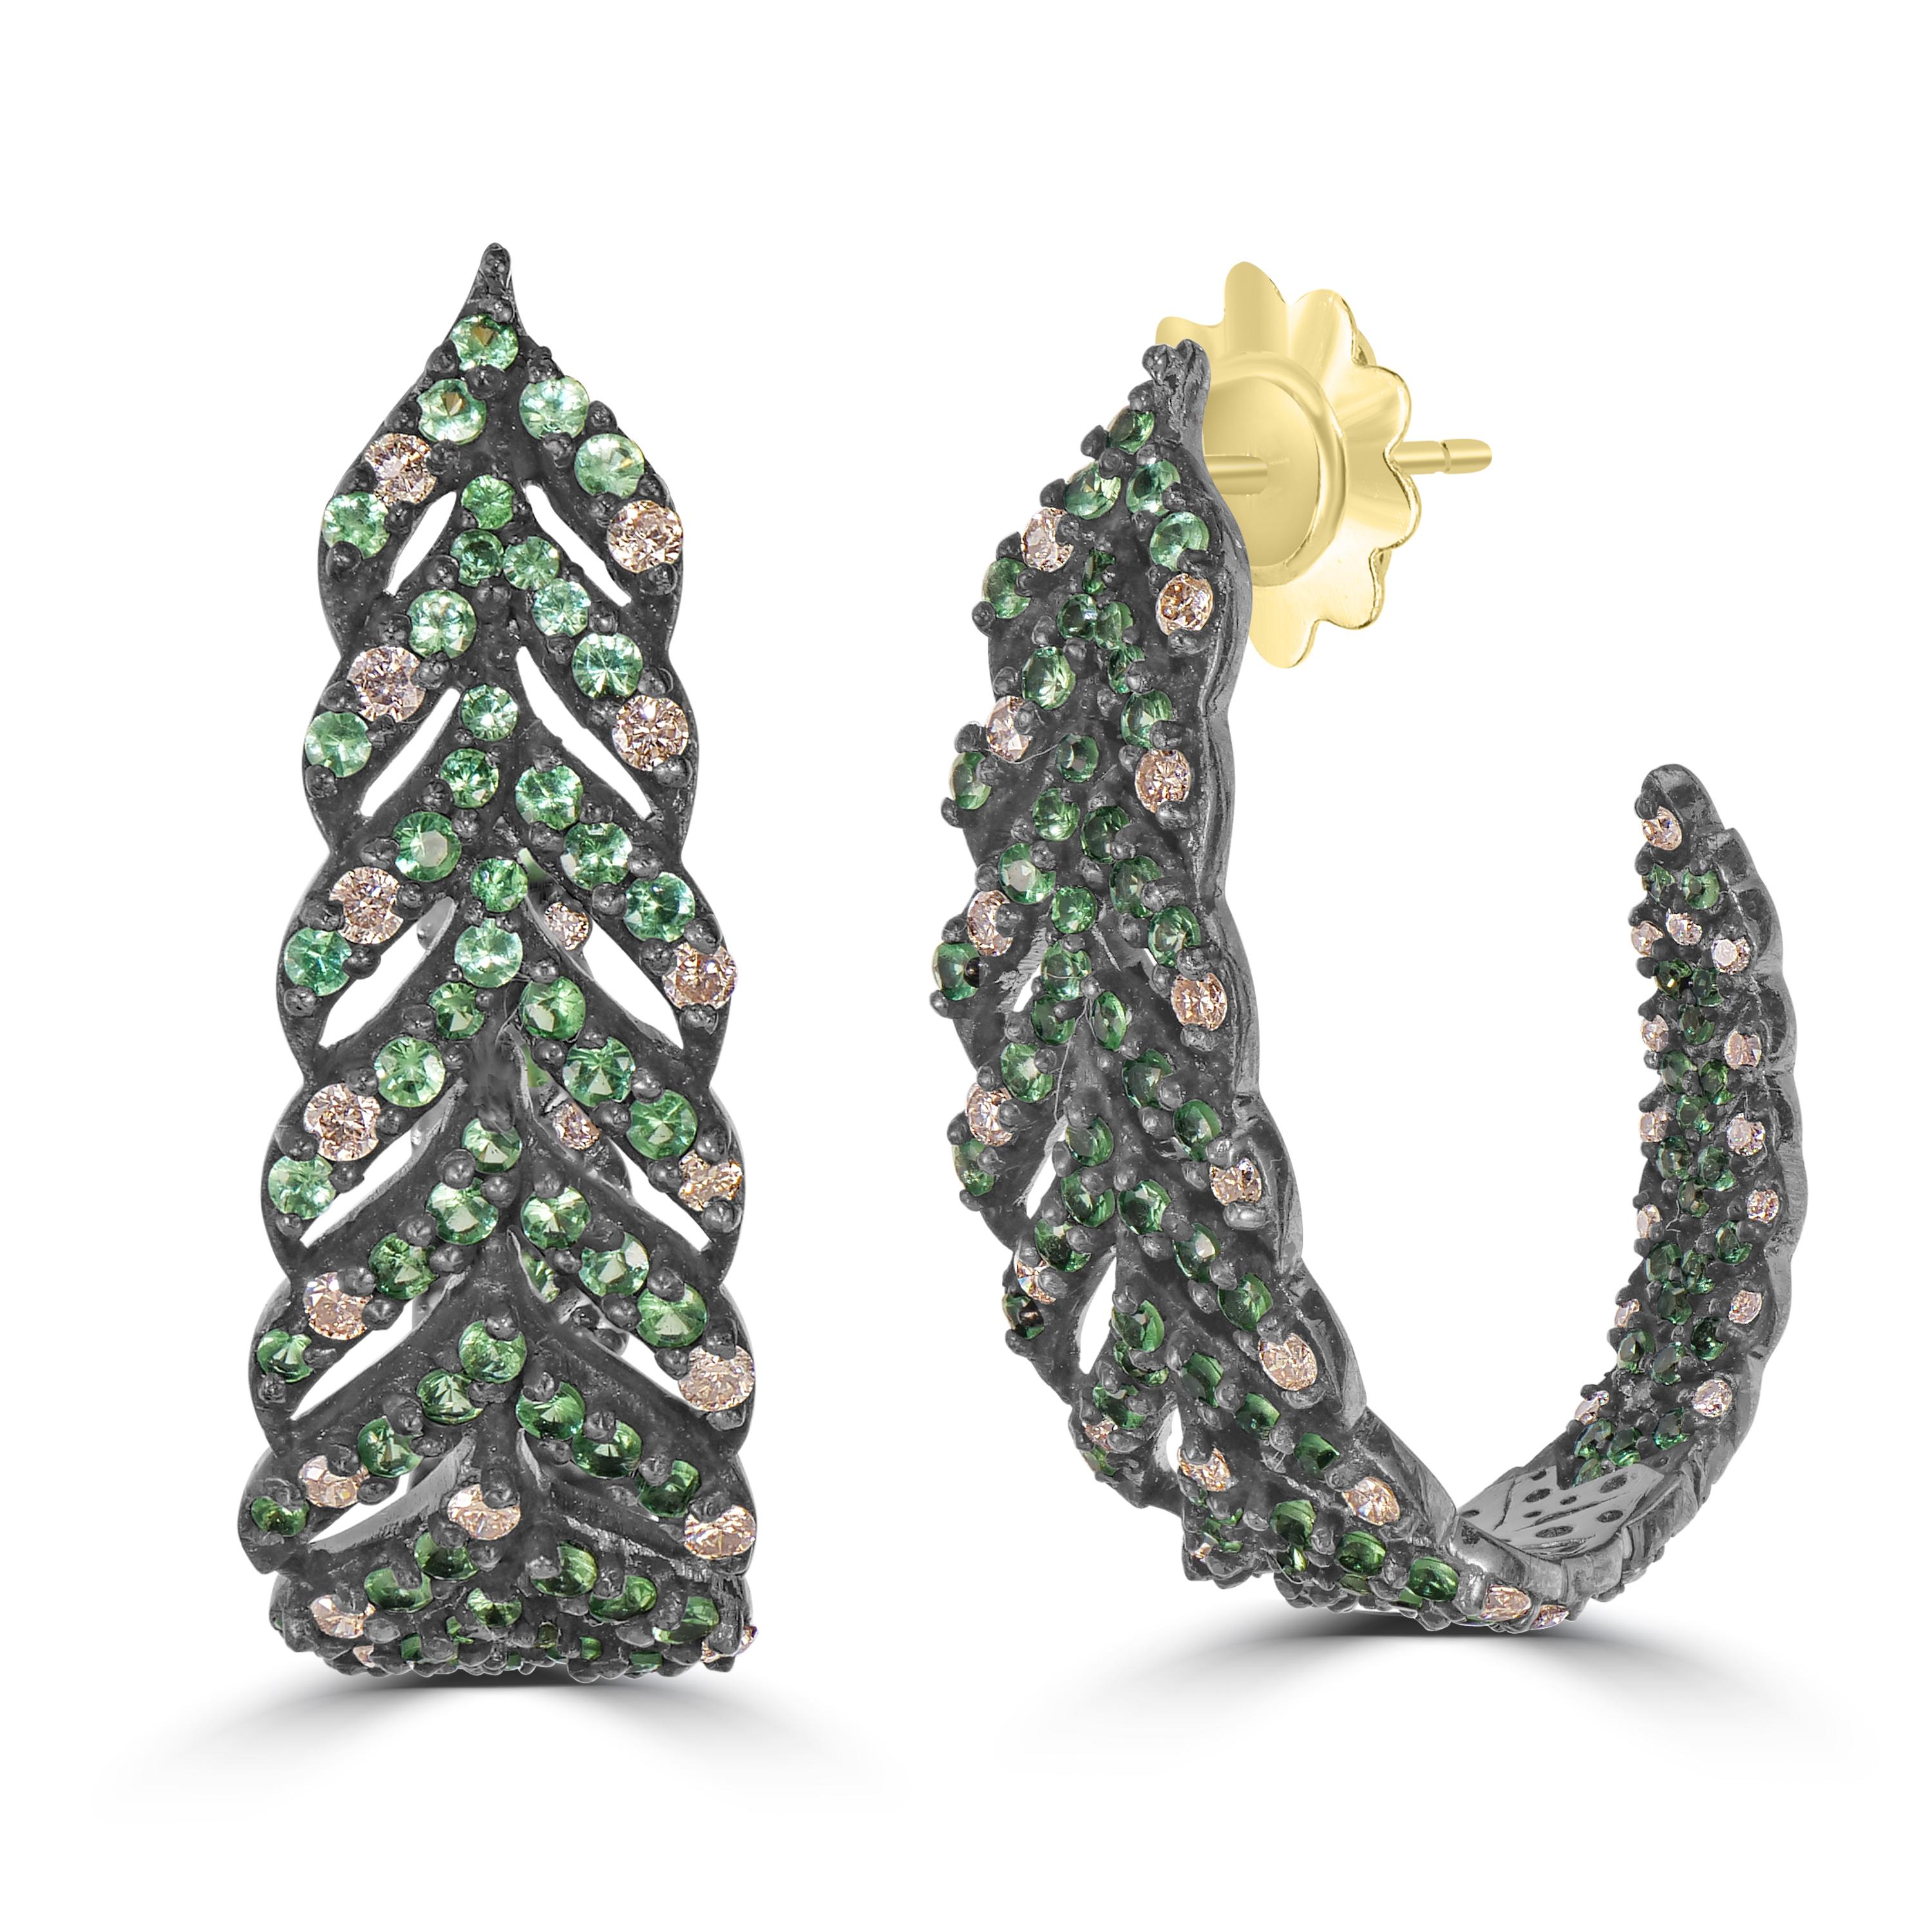 Introducing our Victorian 3.03 Cttw. Tsavorite and Diamond Leaf Hoop Earrings, a testament to the timeless beauty of nature and expert craftsmanship.

Crafted with precision, these hoop earrings feature a delicate arch made of black rhodium on